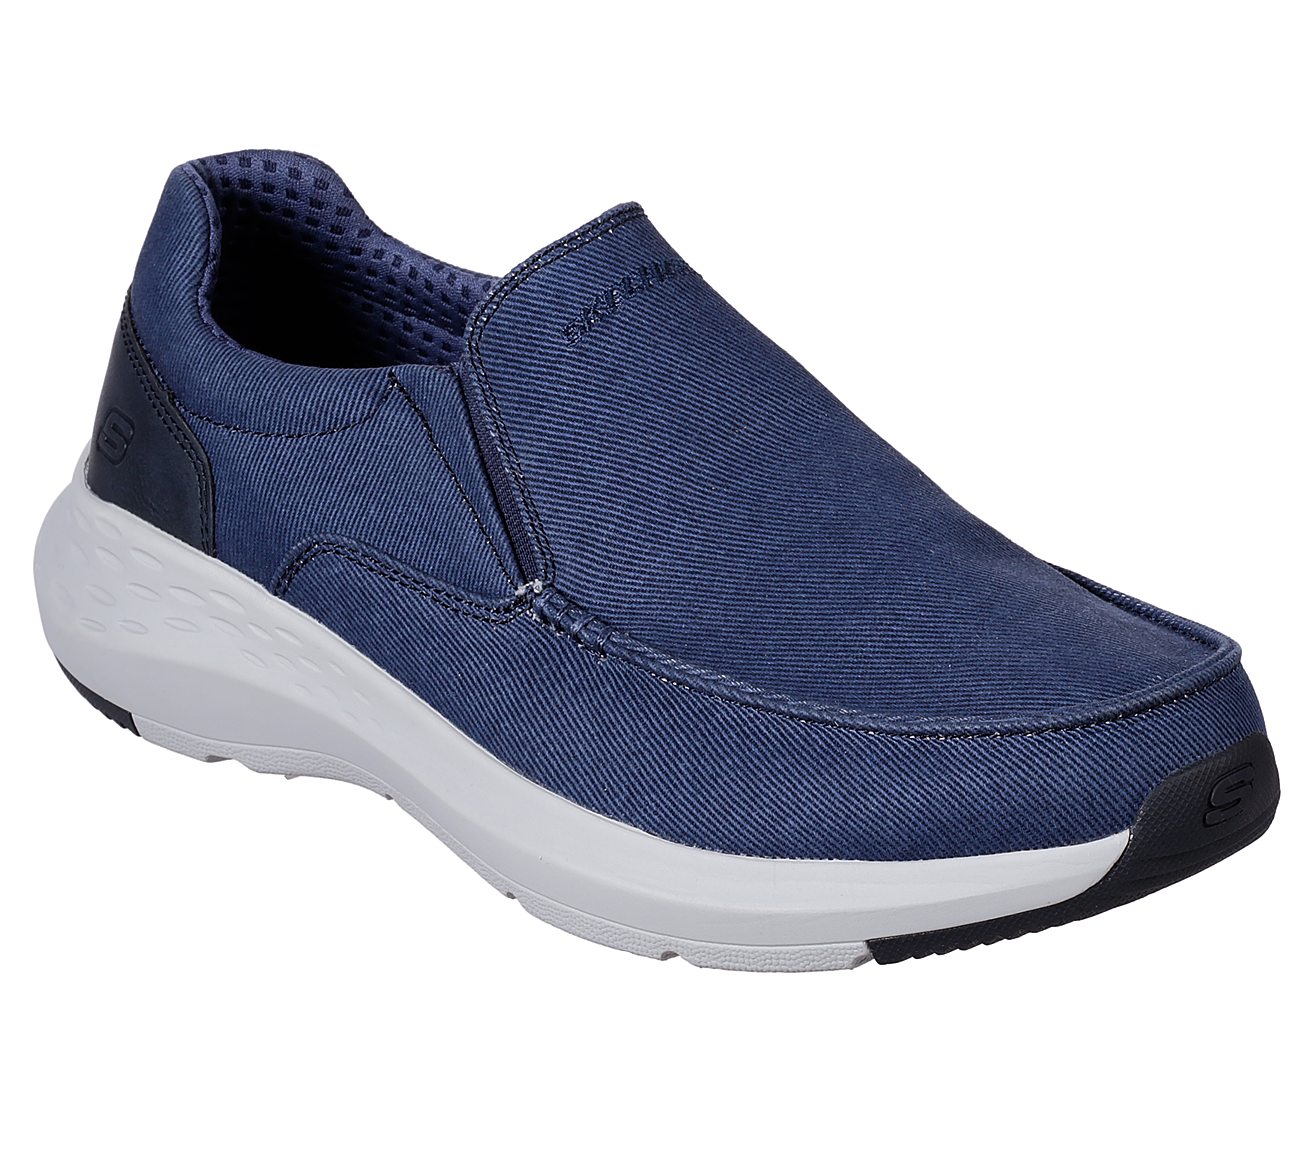 Skechers Relaxed Fit: Parson - Trest